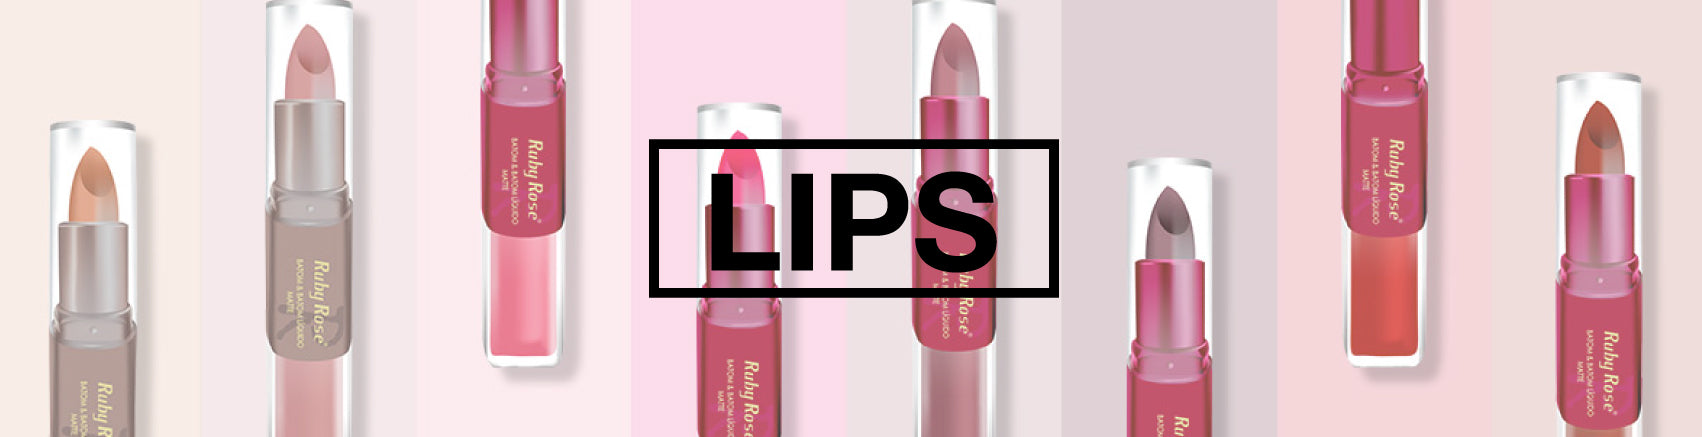 lips ruby rose makeup lebanon delivery online